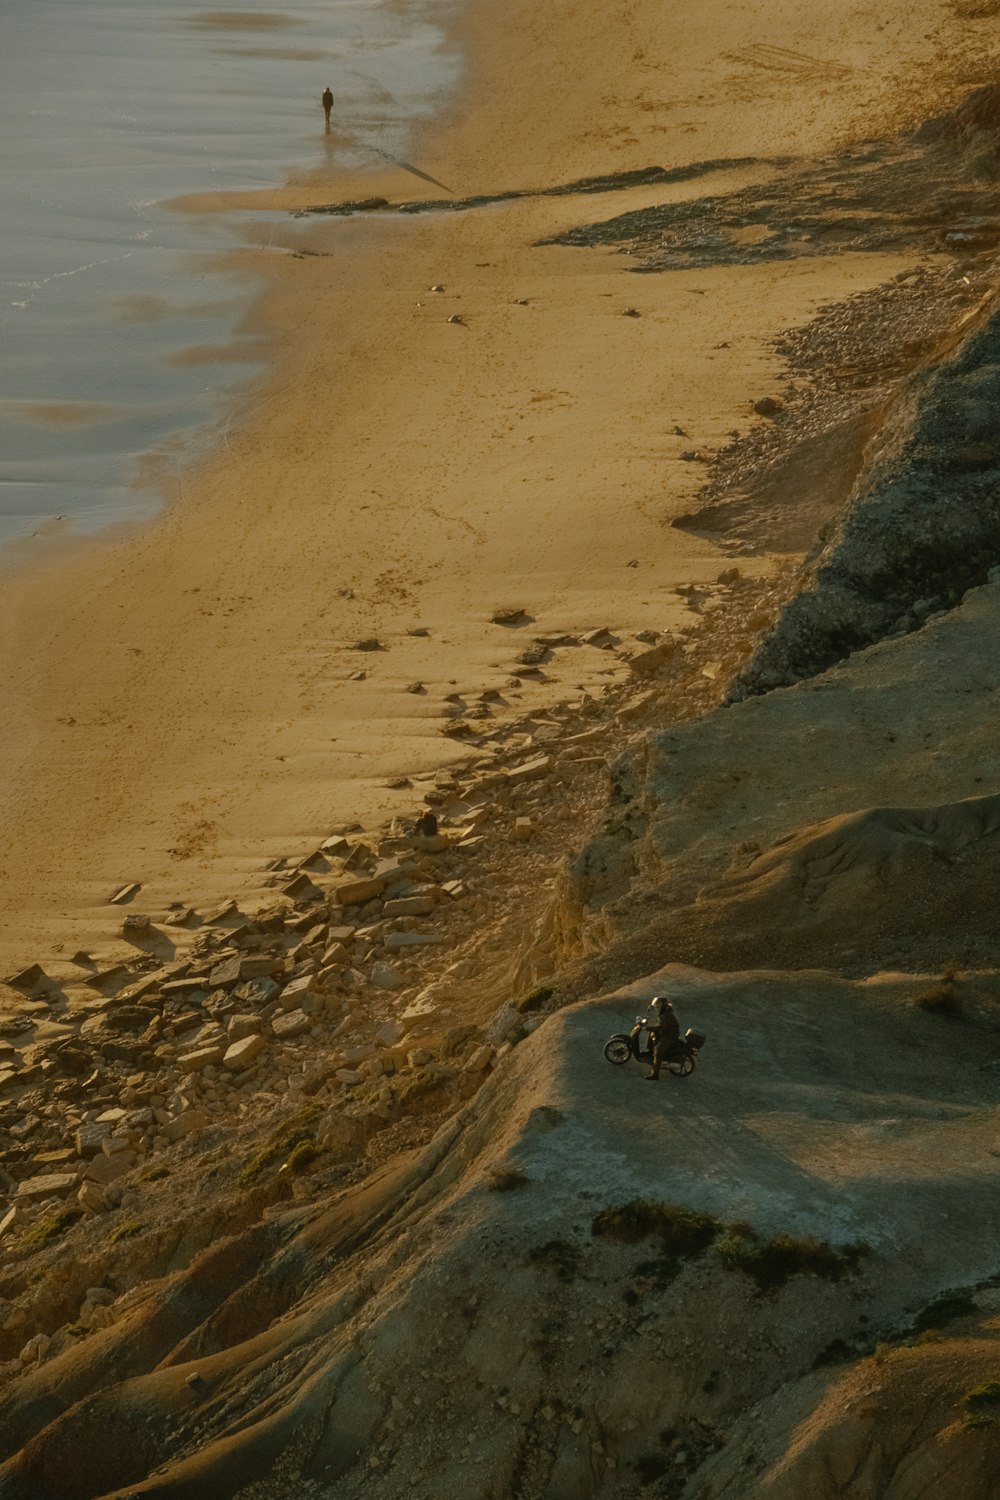 a person riding a motorcycle on a sandy beach